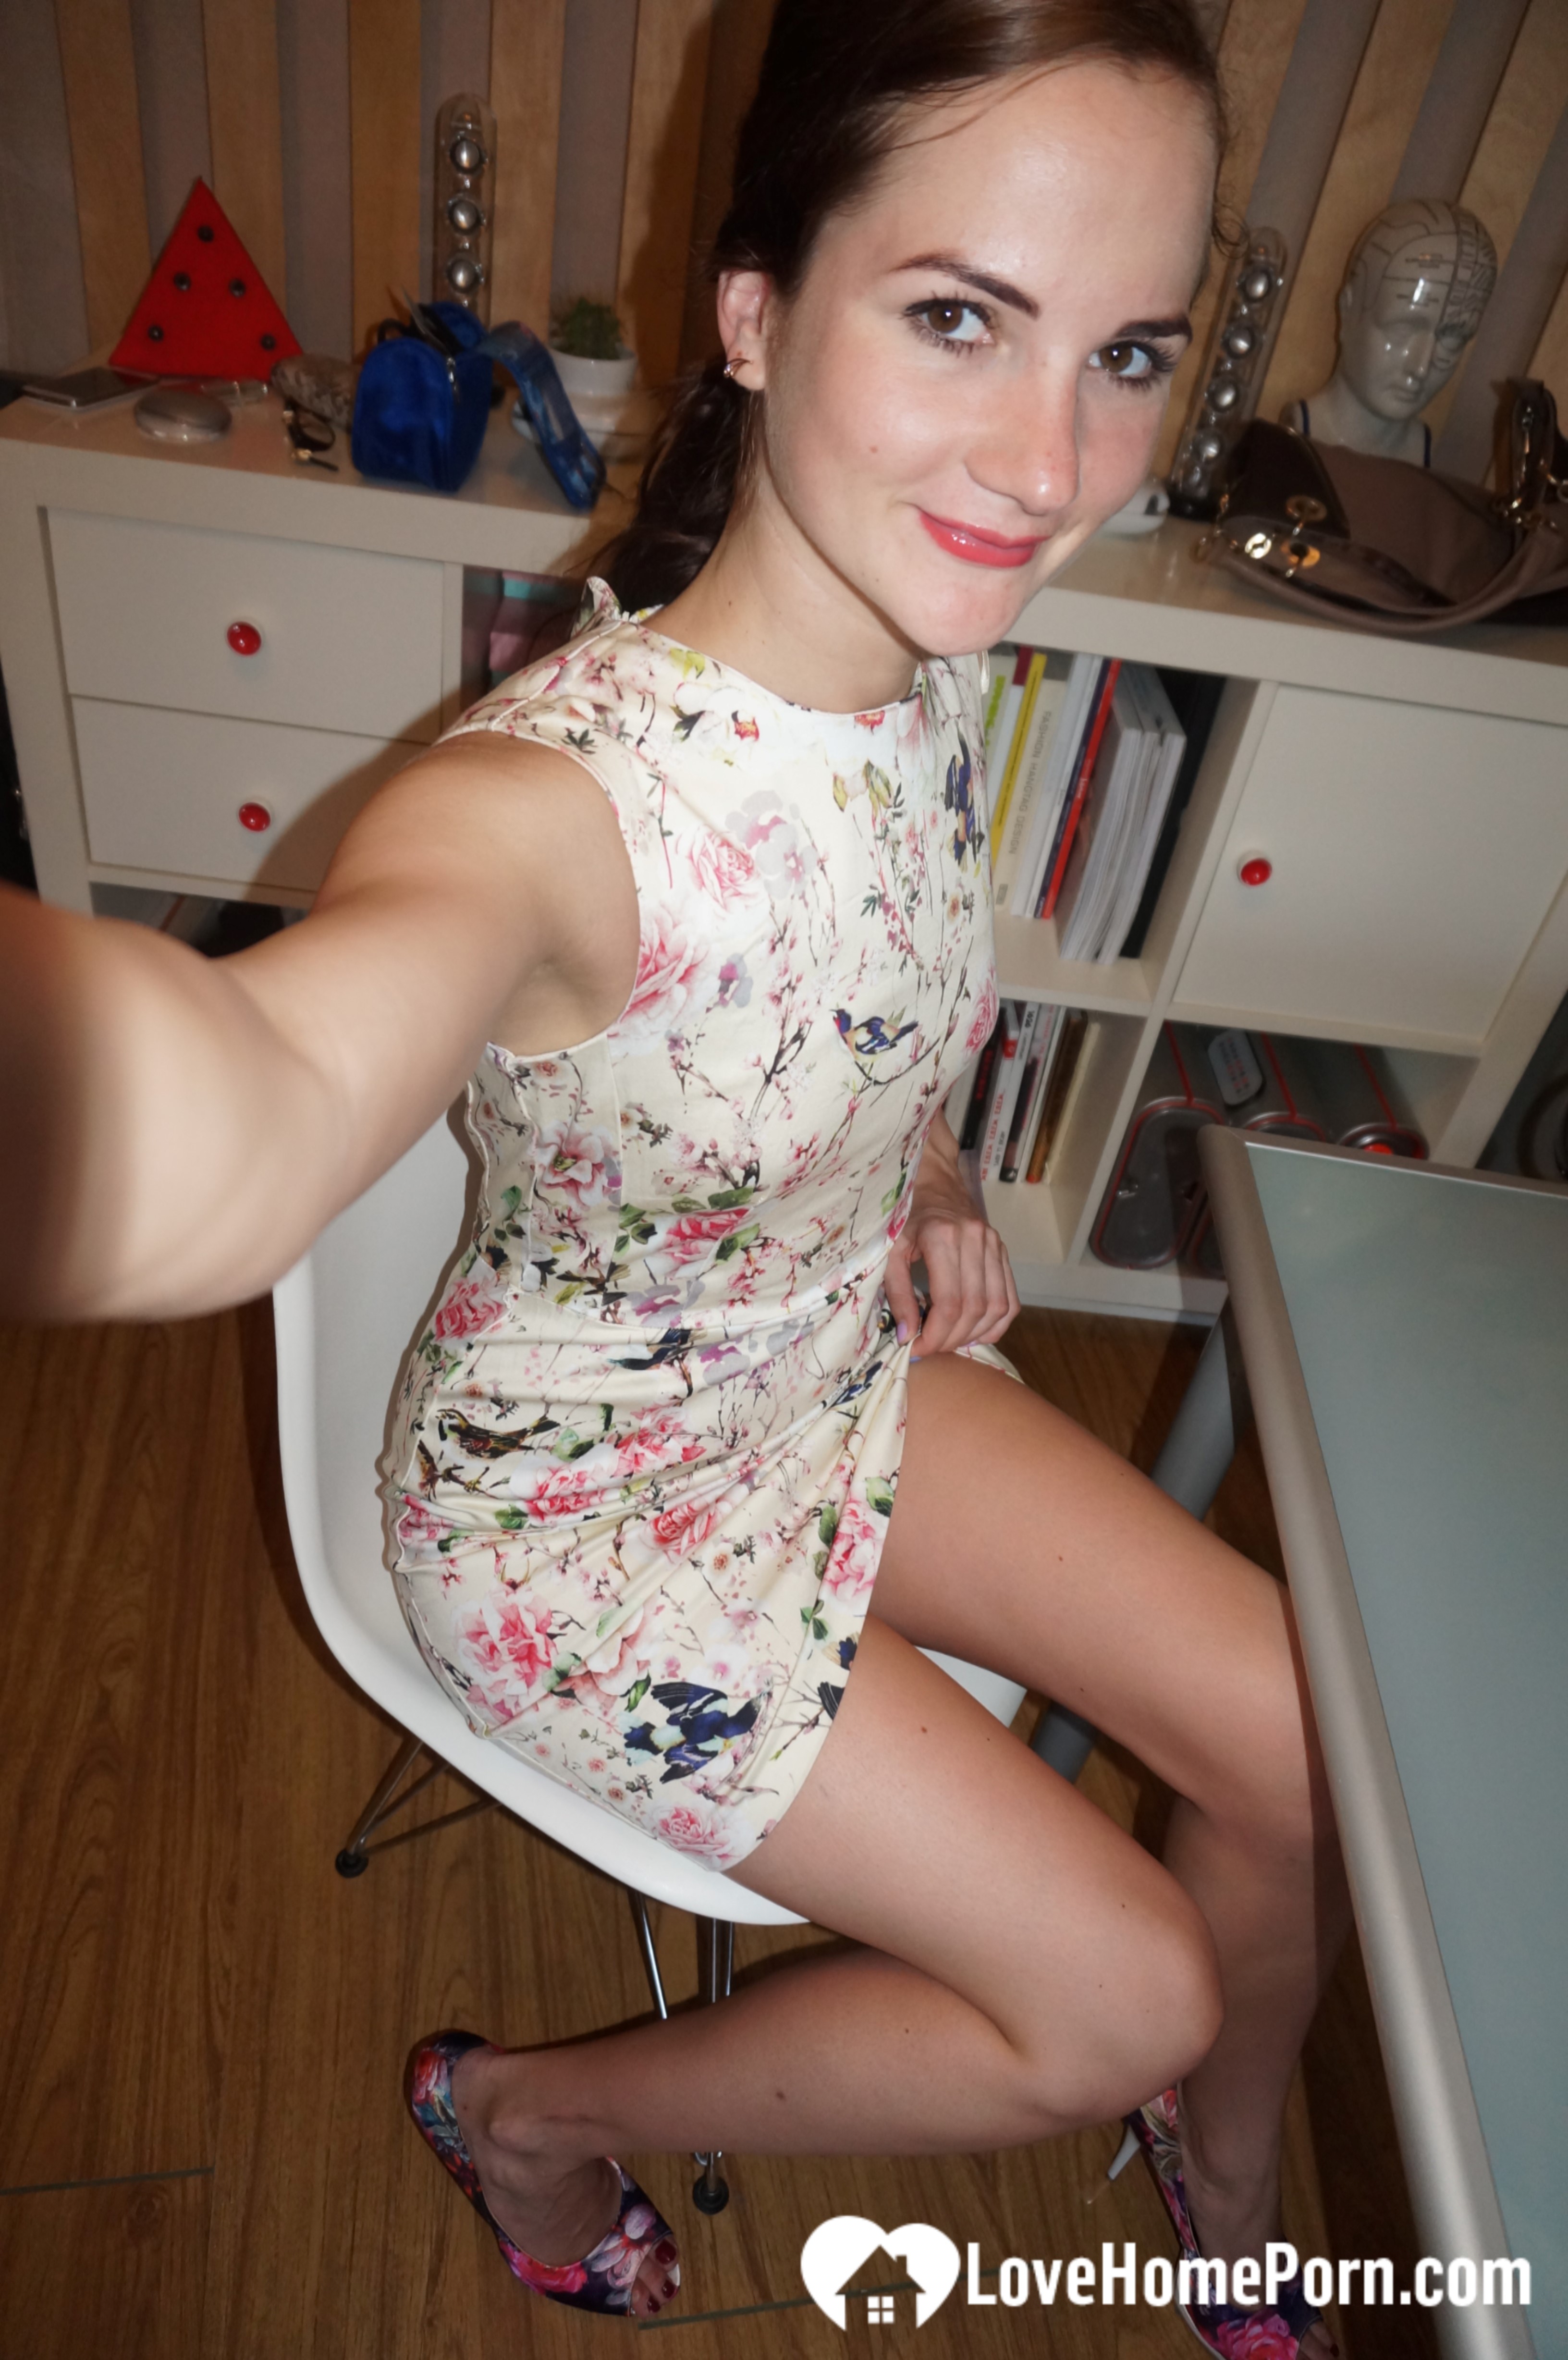 Nerdy babe exposes her good bits on camera